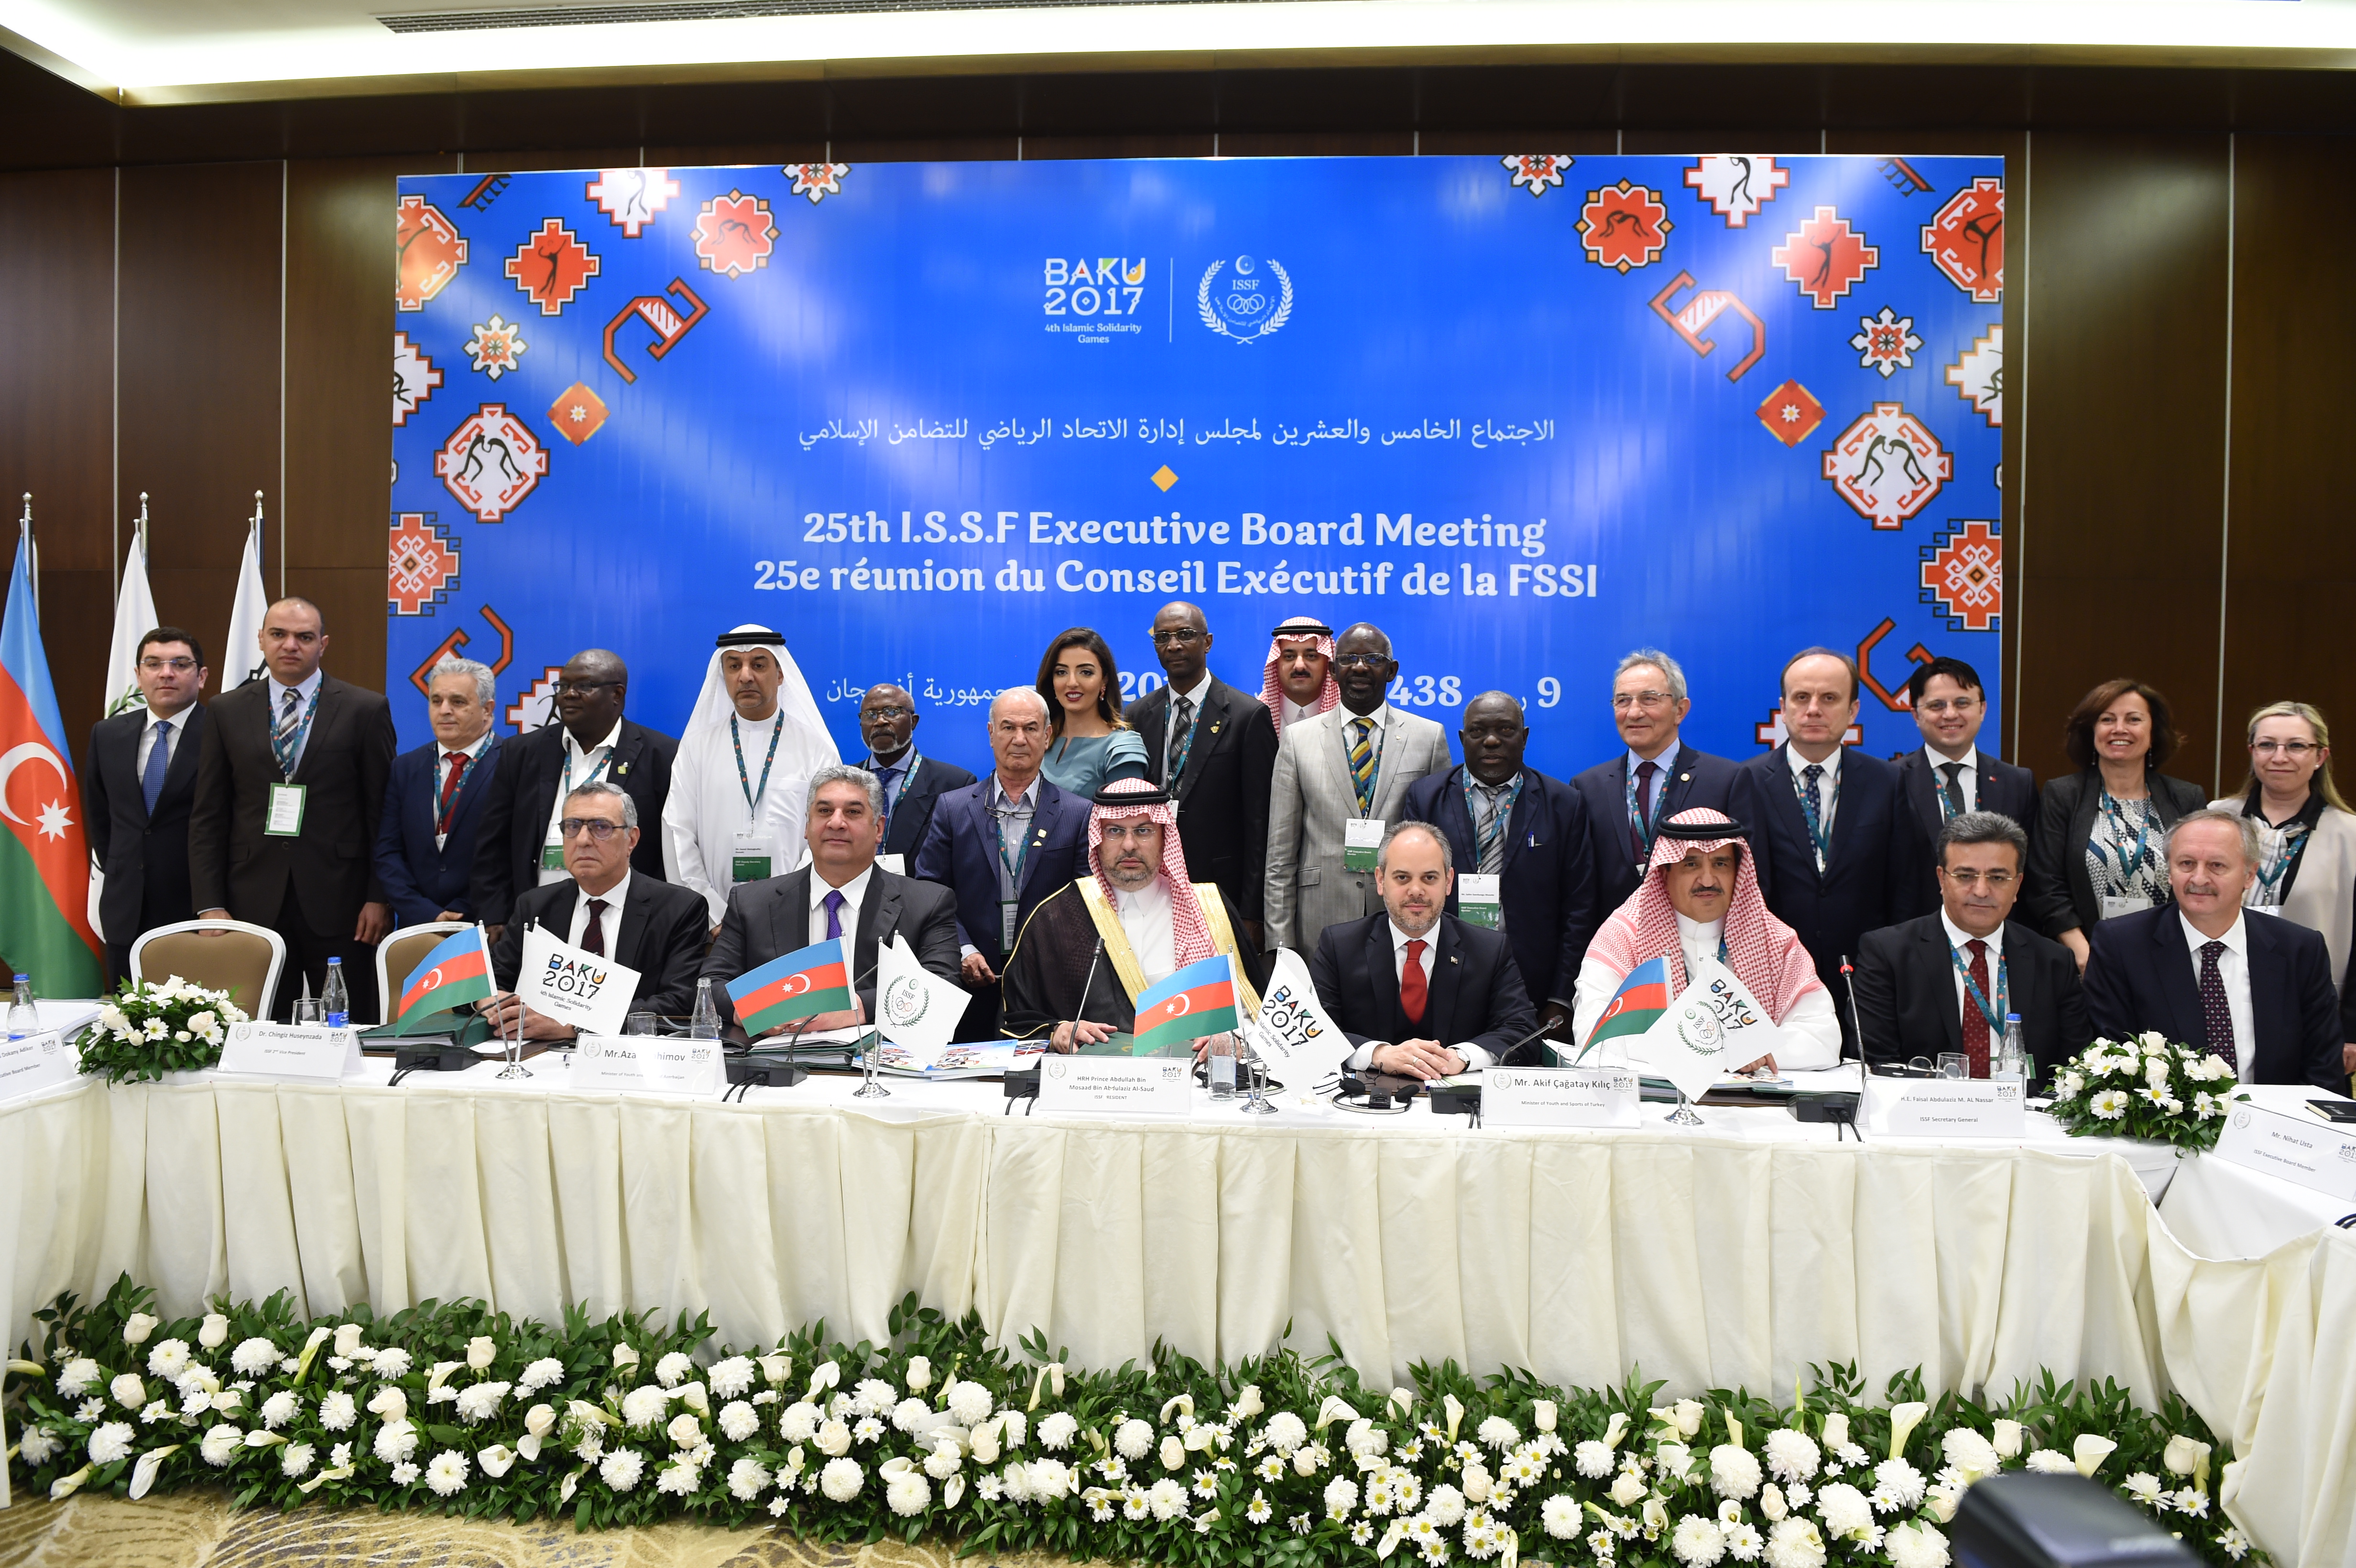  The 25th ISSF Executive Board Meeting